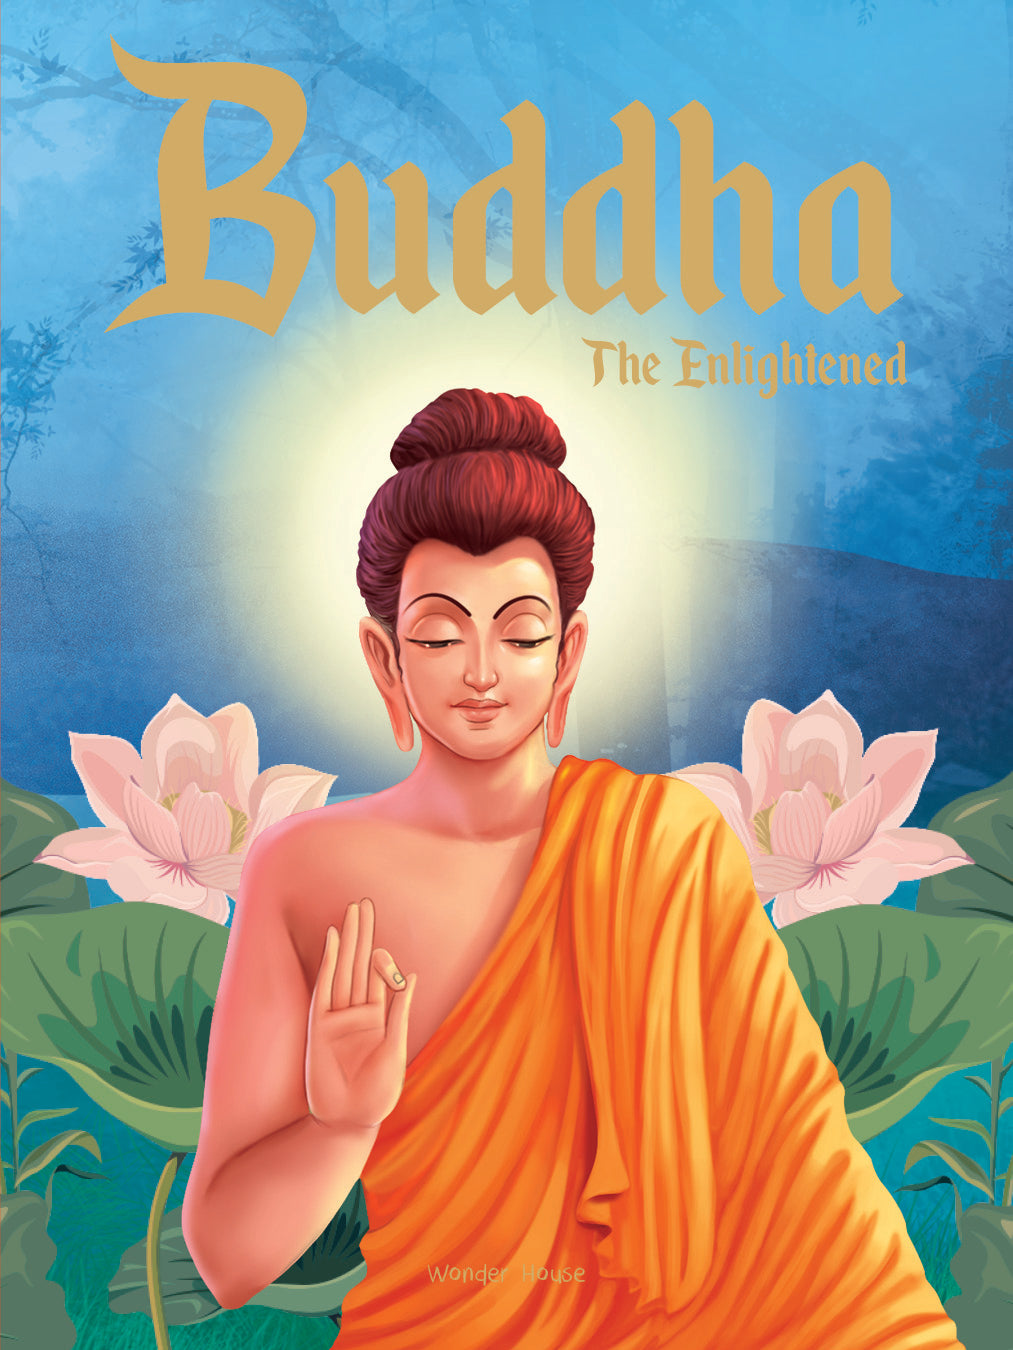 Buddha: The Enlightened- Illustrated Stories From Indian History And Mythology